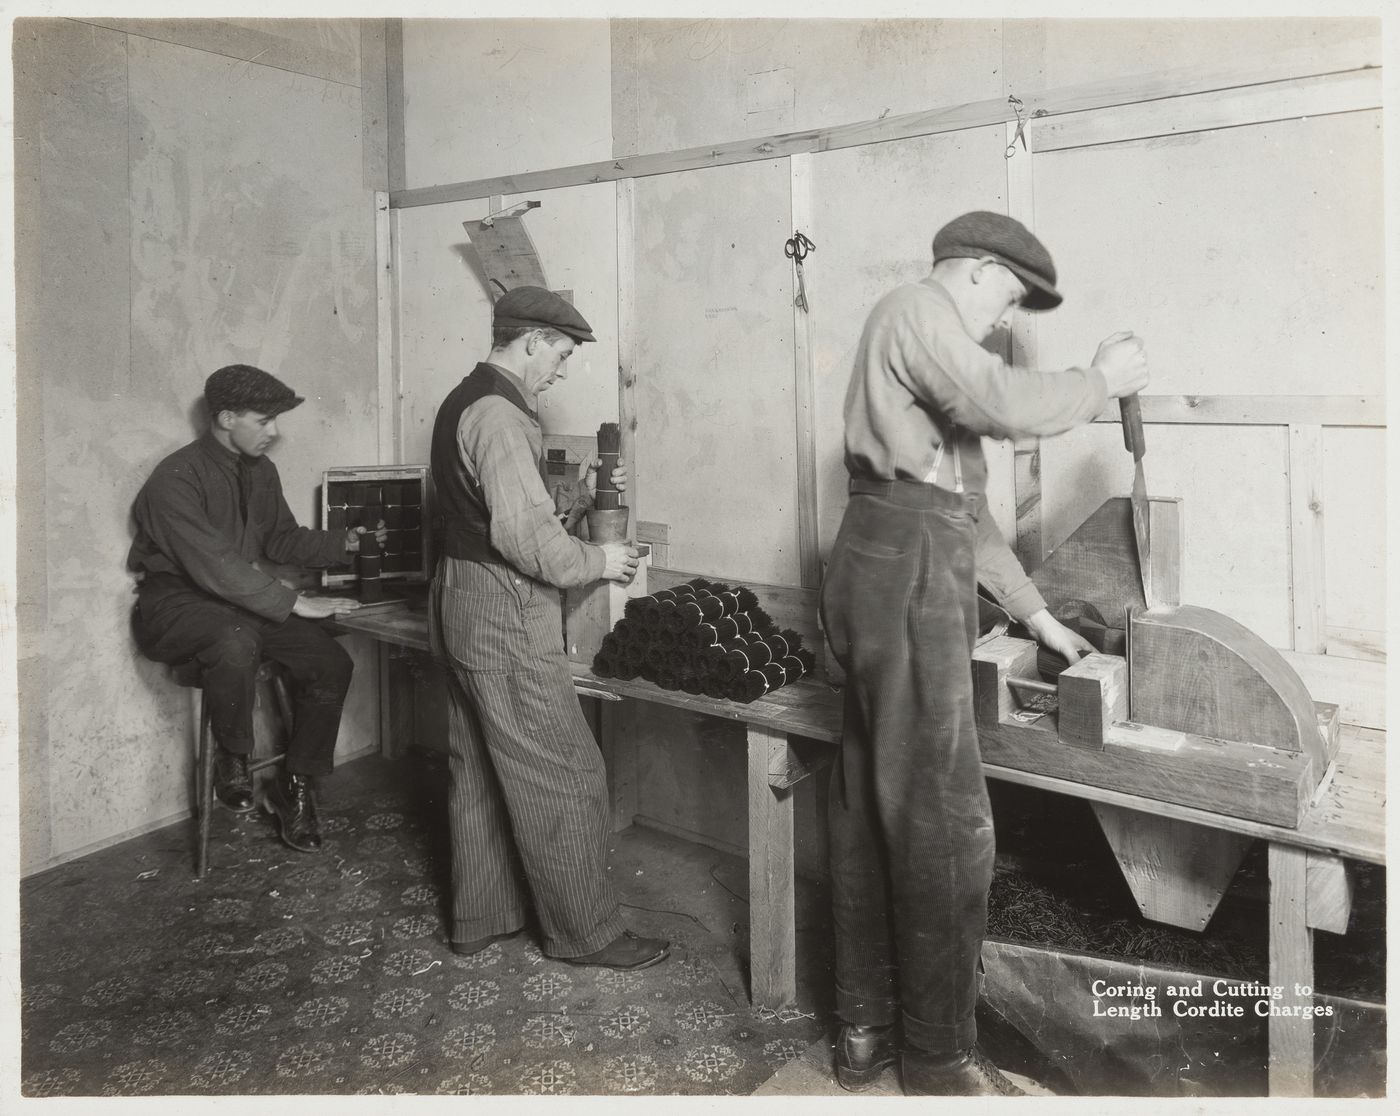 Interior view of workers coring and cutting to length cordite charges at the Energite Explosives Plant No. 3, the Shell Loading Plant, Renfrew, Ontario, Canada